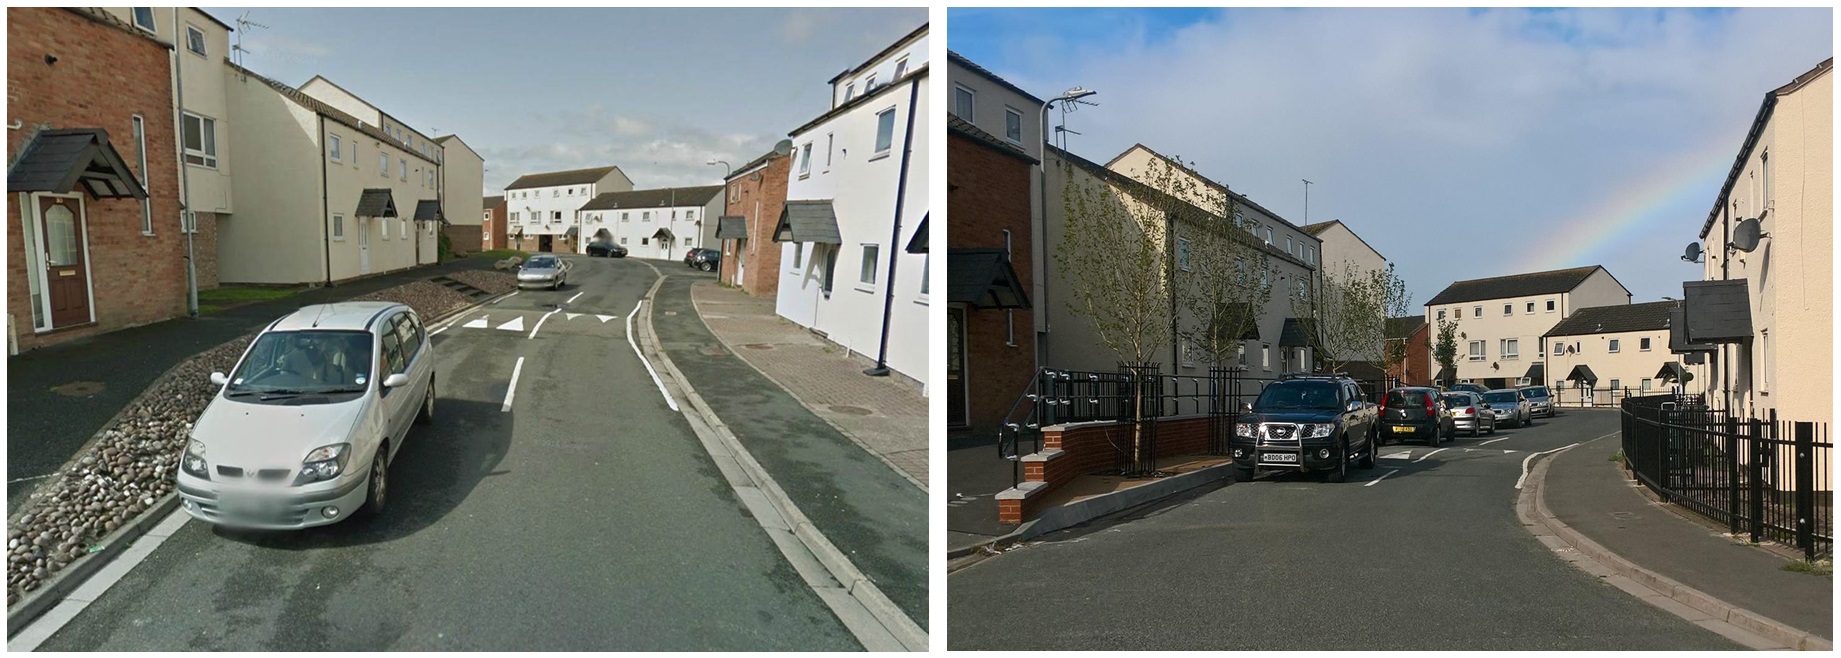 Before and after of street improvements in Tre Cwm, with new walkway and railings on the right